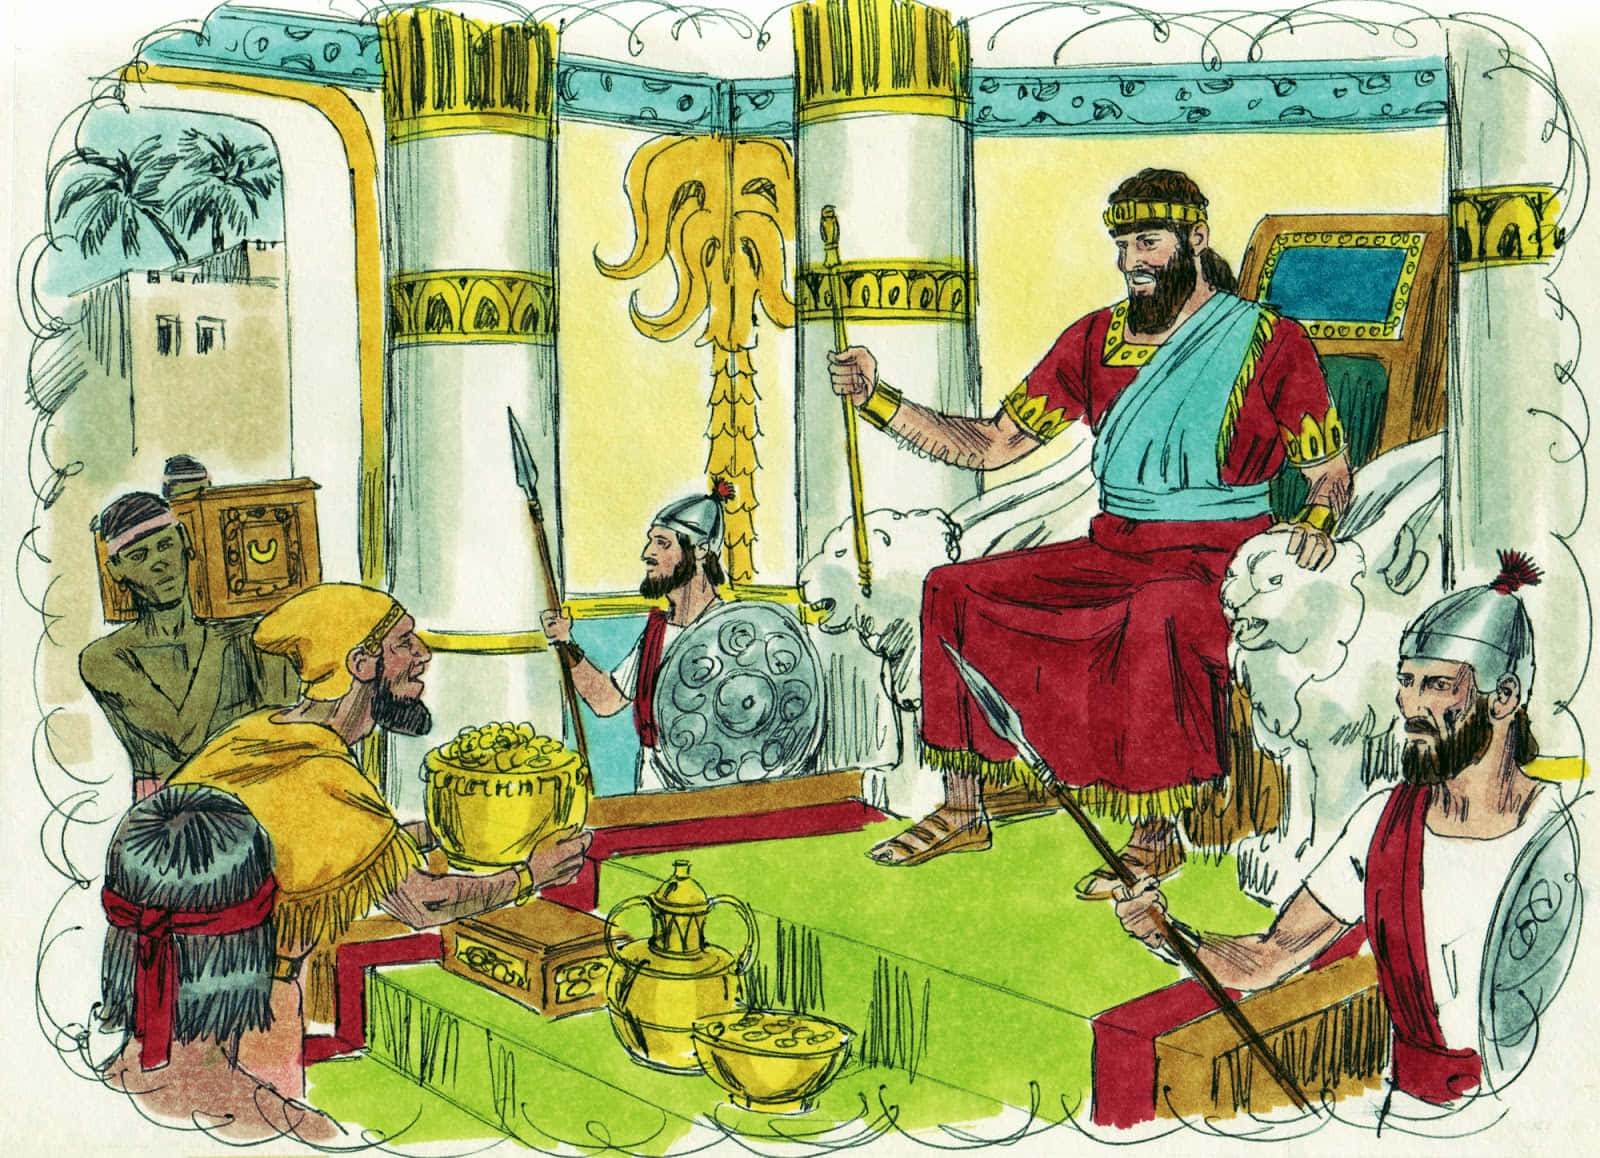 A Cartoon Illustration Of A King Sitting On A Throne